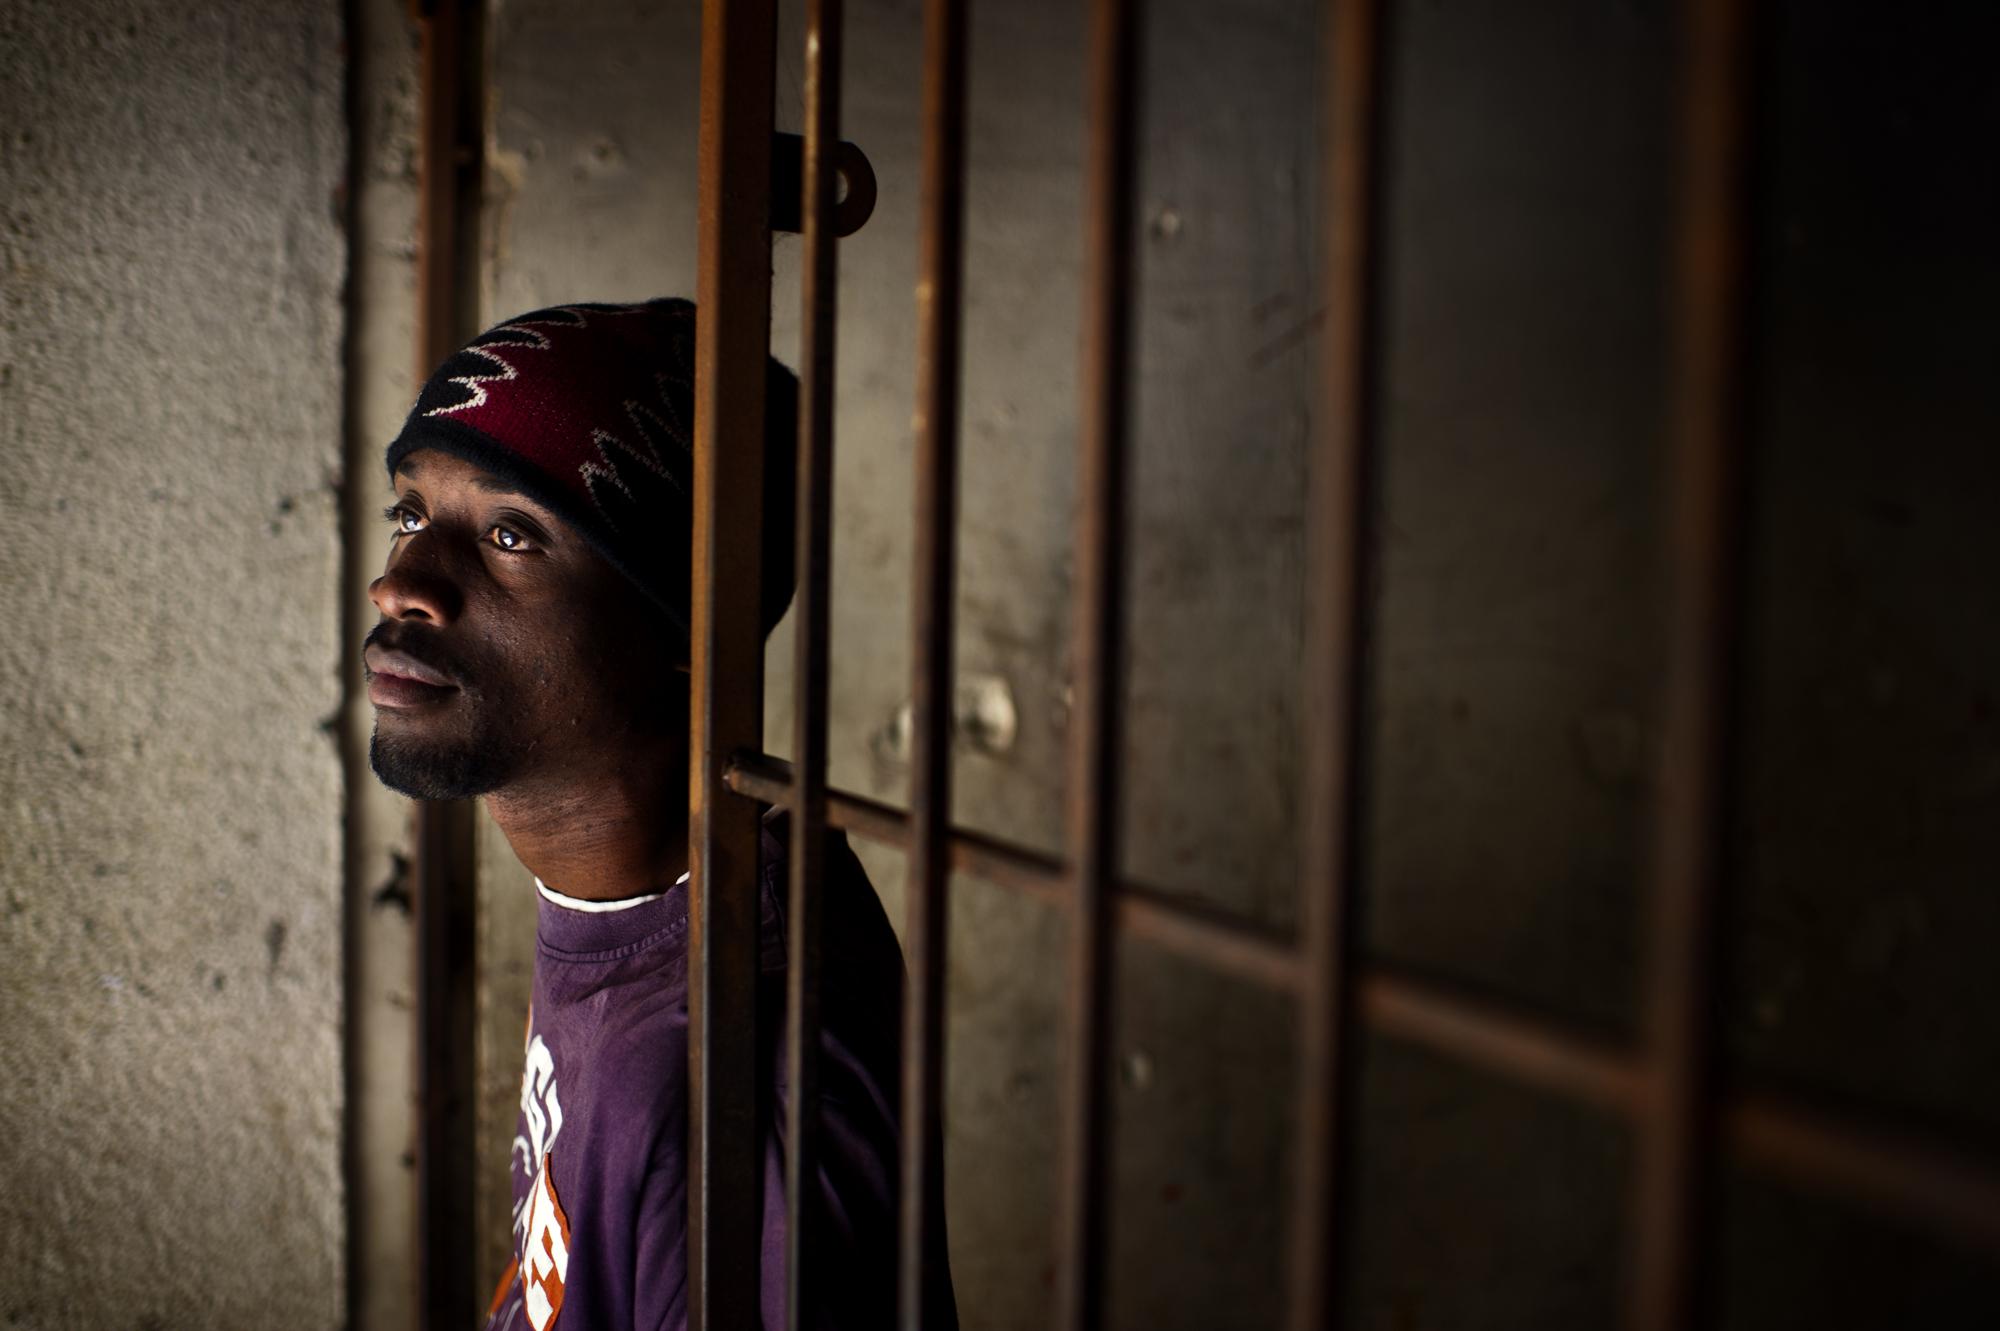 Into the shadows - Johannesburg, South Africa. June 2011. Nickolson is from...